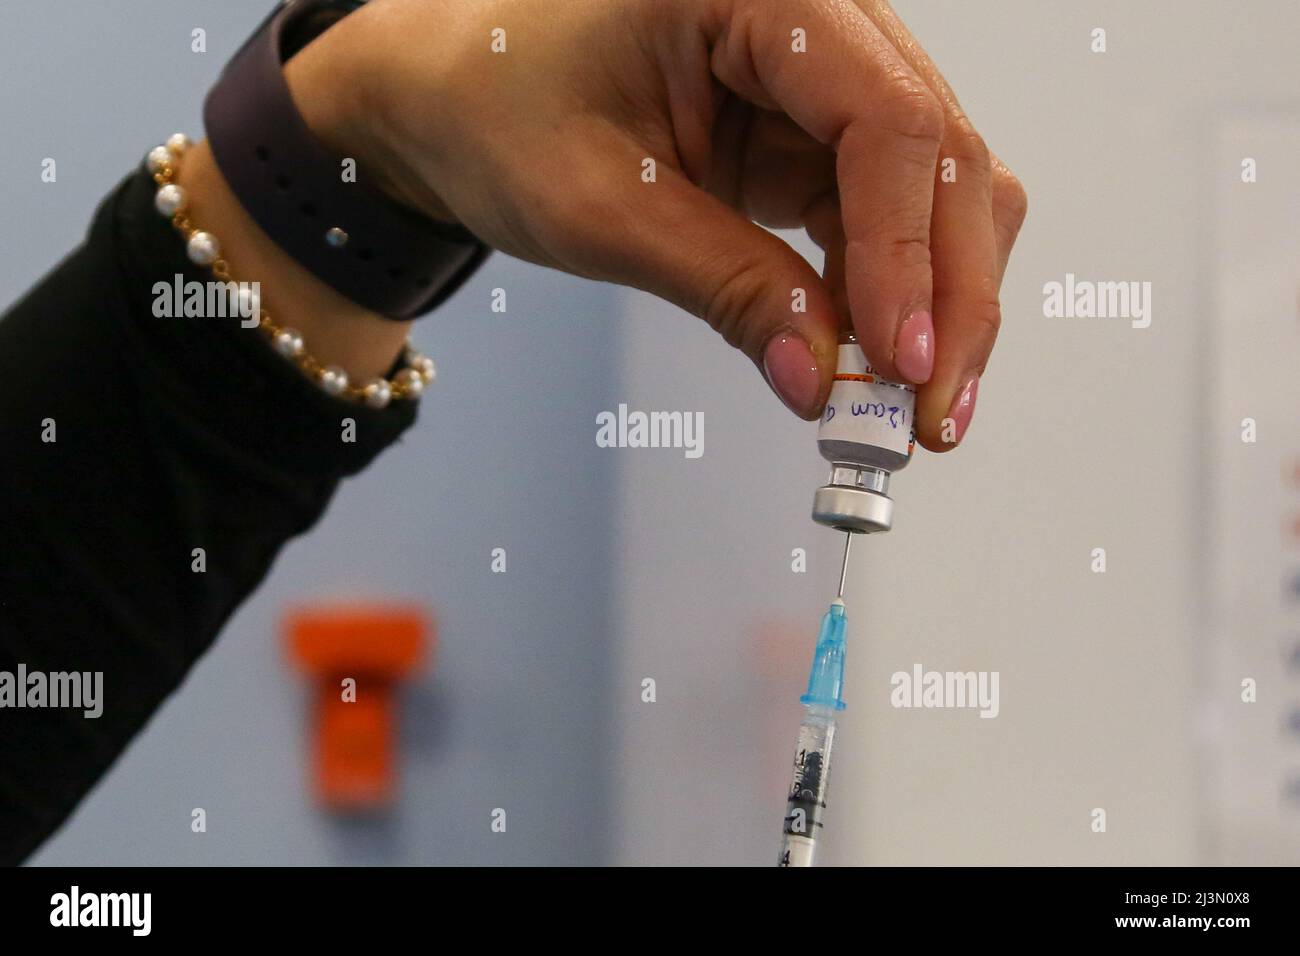 London. UK 8 Apr 2022 - A doctor draws the first dose of the Pfizer COVID-19 jab as she prepares to administer the vaccine to a child under the age of 11 years at a vaccination centre. Parents and carers are encouraged to get children aged 5 to 11 their COVID-19 vaccine as over 5 million children in England are eligible for the jab. Children are offered two doses of the Pfizer/BioNTech vaccine, administered at least 12 weeks apart.  Credit Dinendra Haria /Alamy Live News Stock Photo